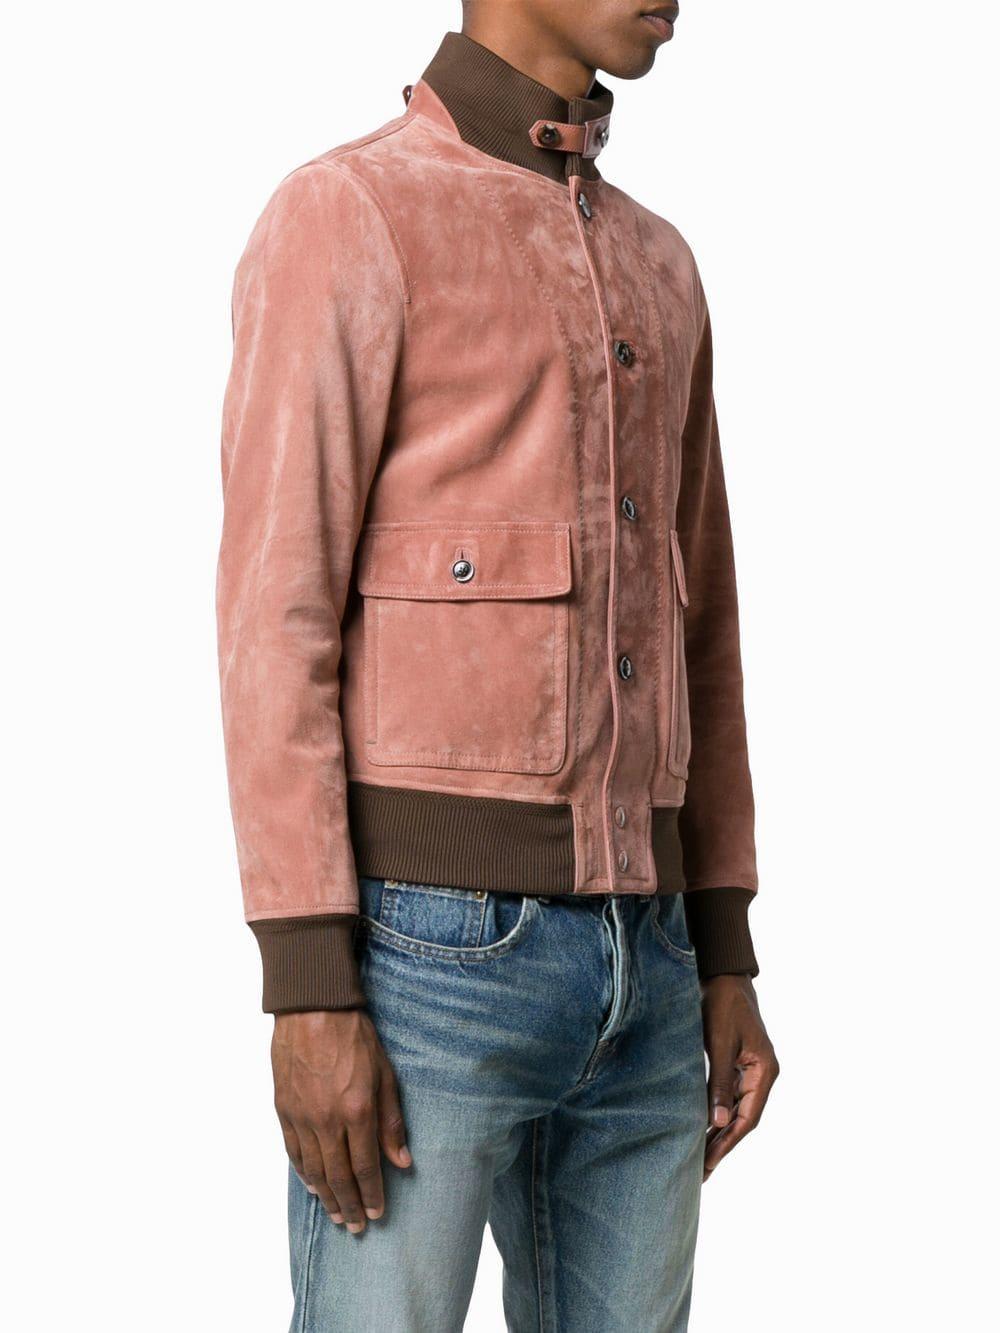 Tom Ford Suede Fitted Bomber Jacket in Pink for Men - Lyst